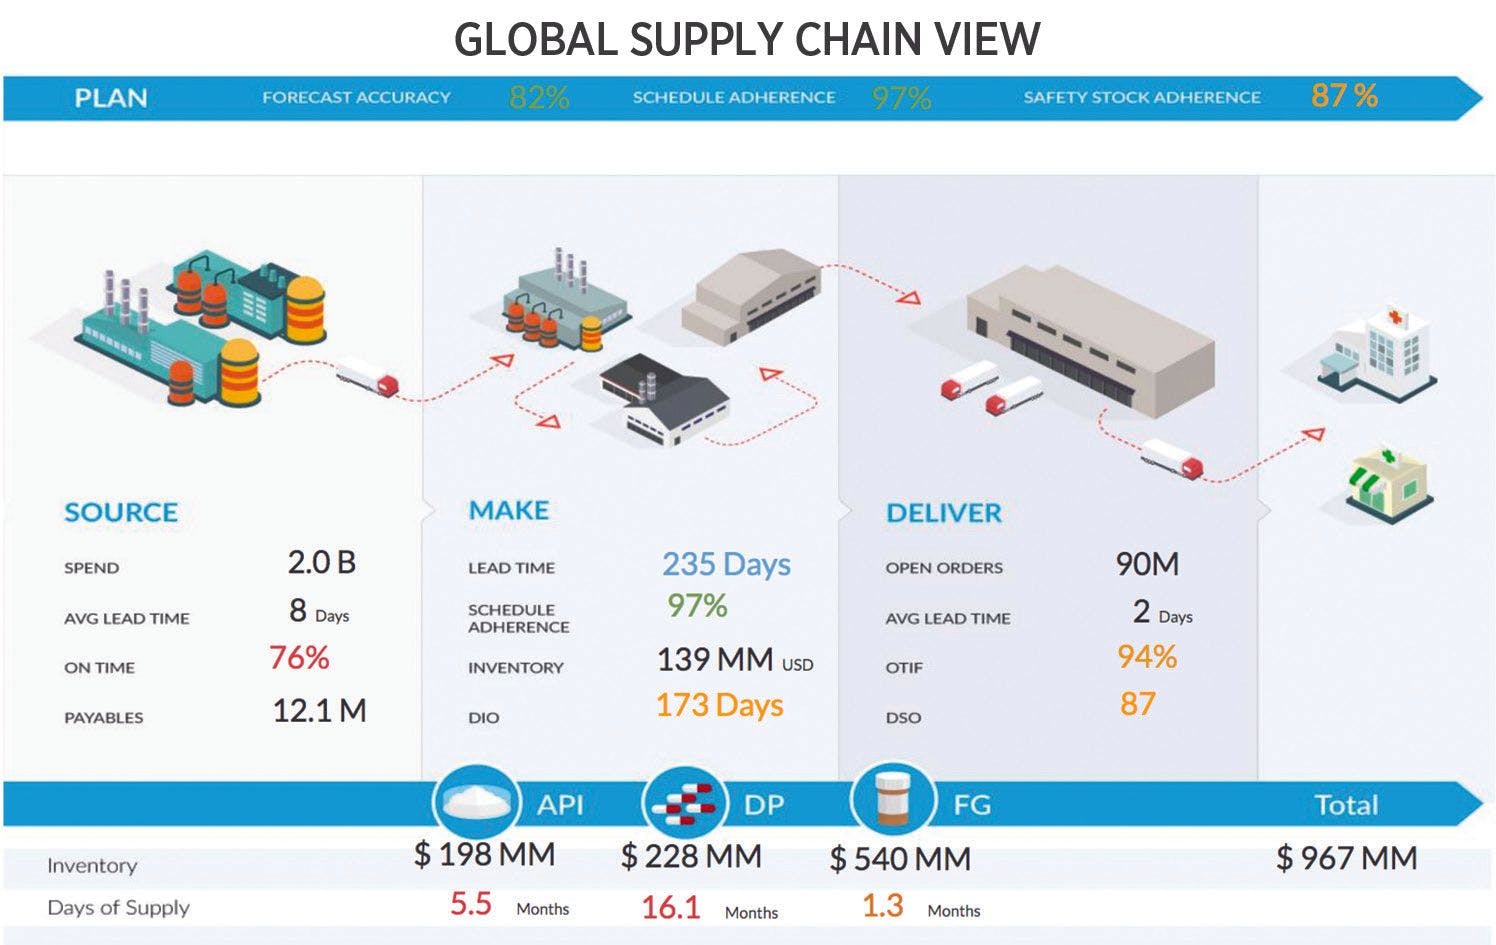 Managing supply chains from the cloud